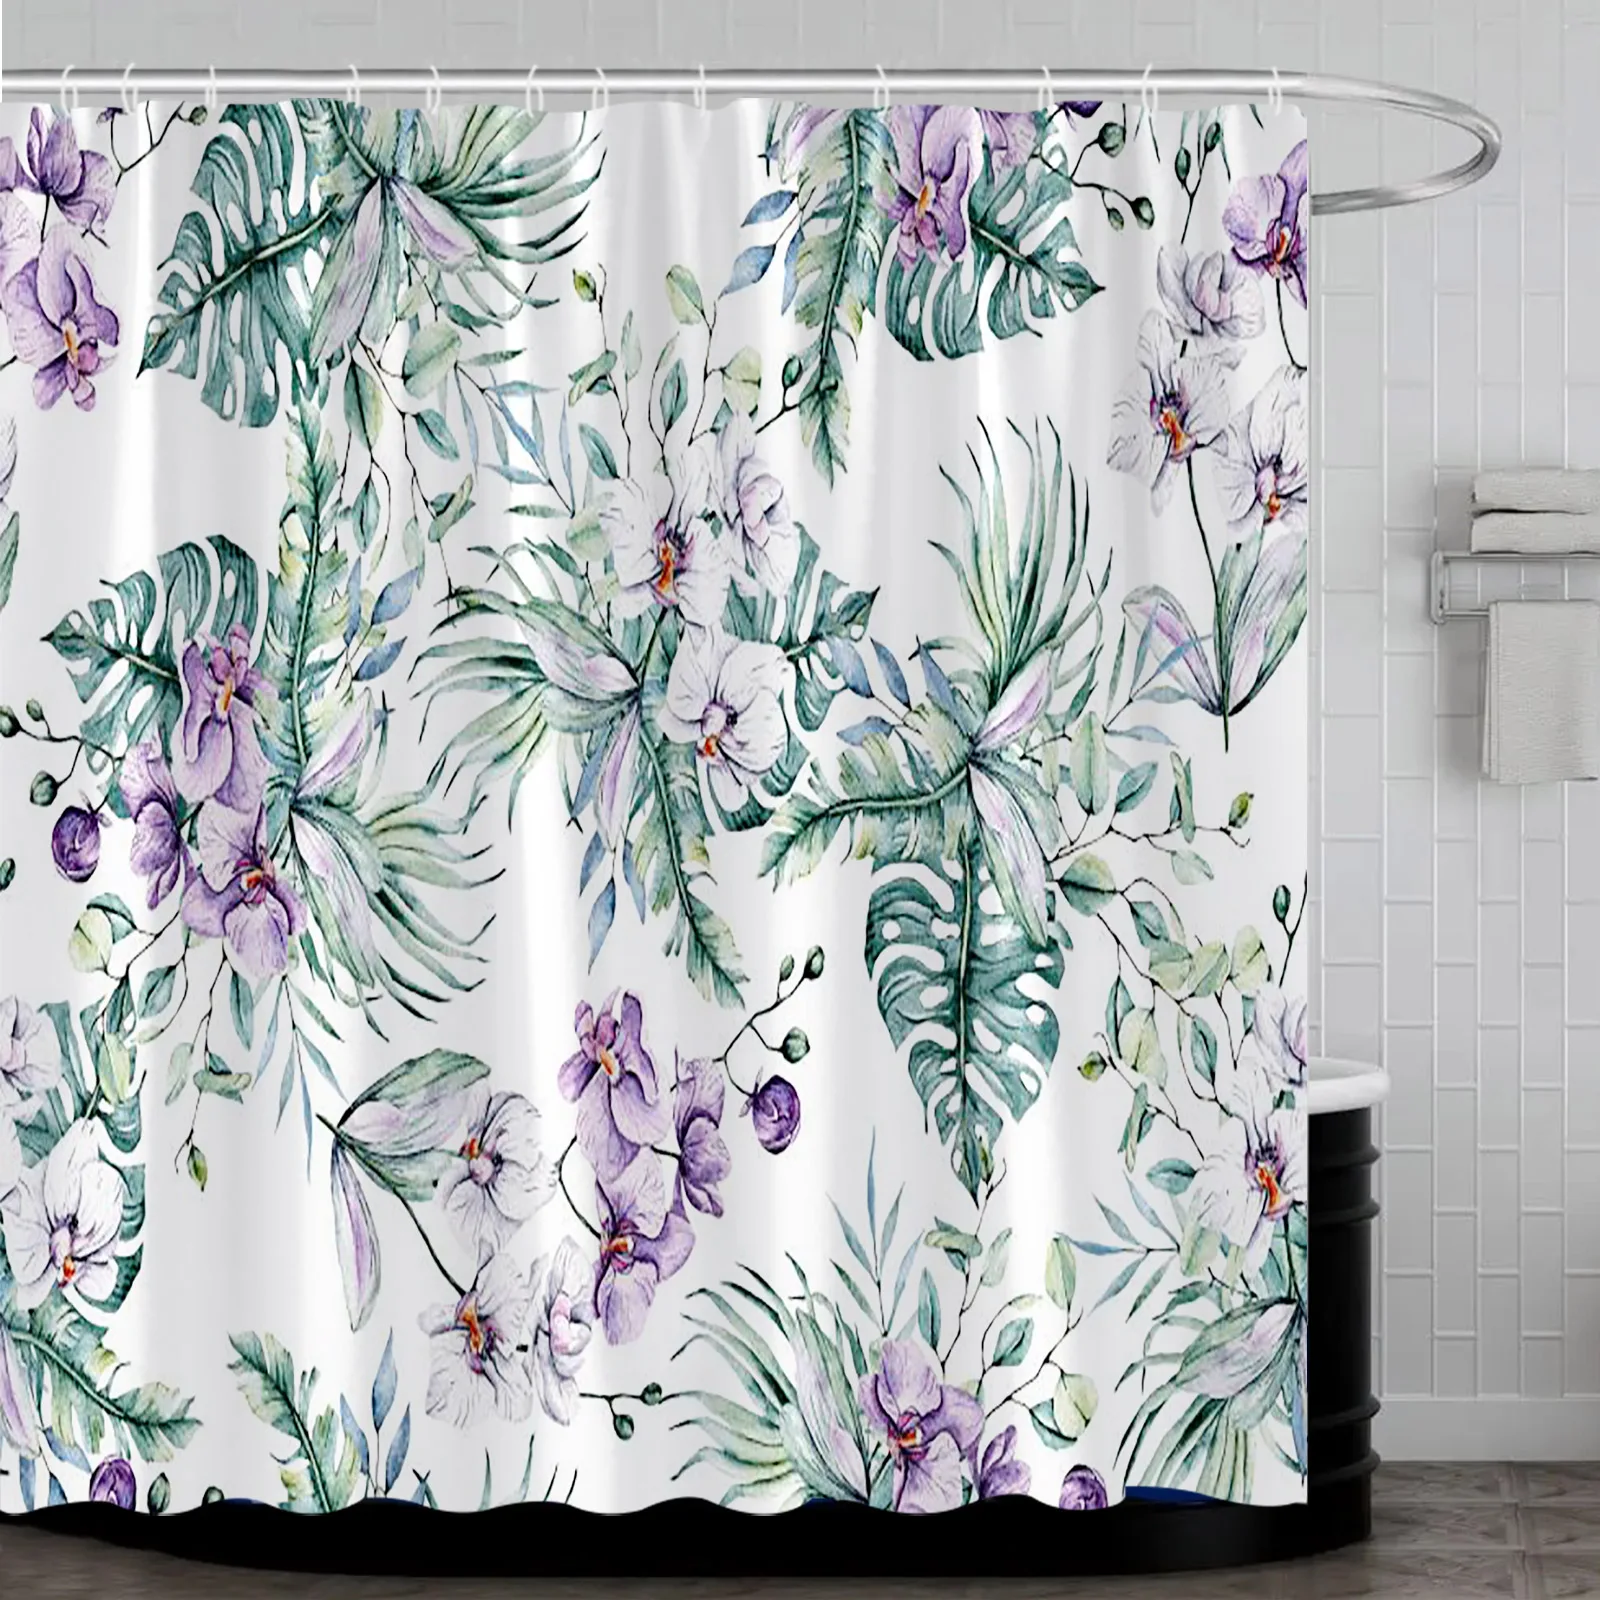 

Curtain Aesthetic Home Decoration with Hooks Bathroom Curtain Fabric Hanging Curtains Orchid Landscape Scenery